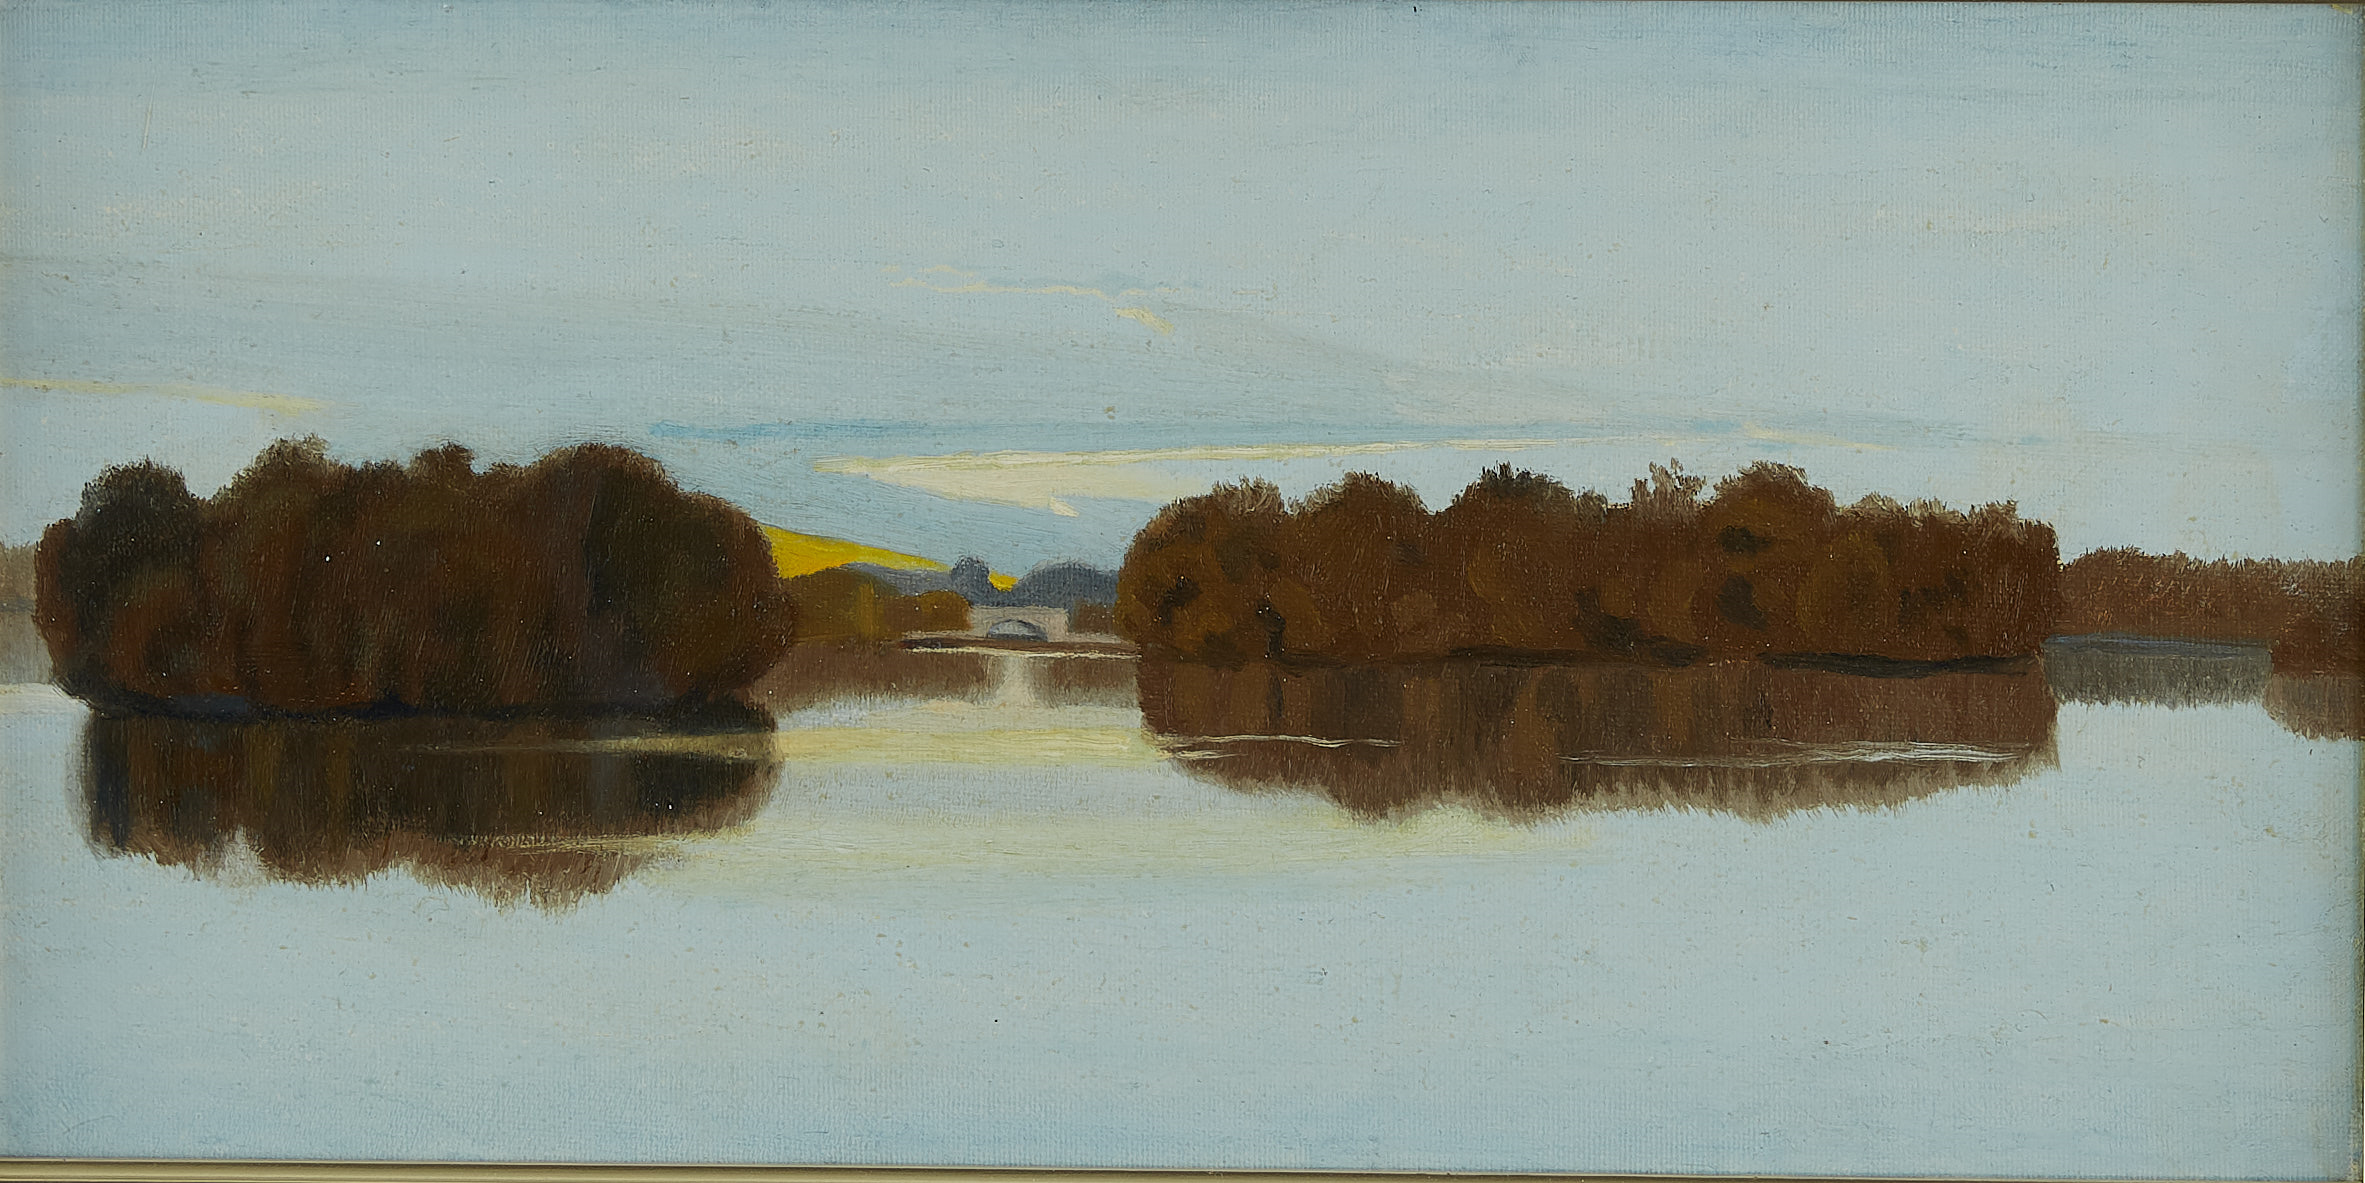 Lot 086: James Childs "Lake of the Isles" Oil Painting